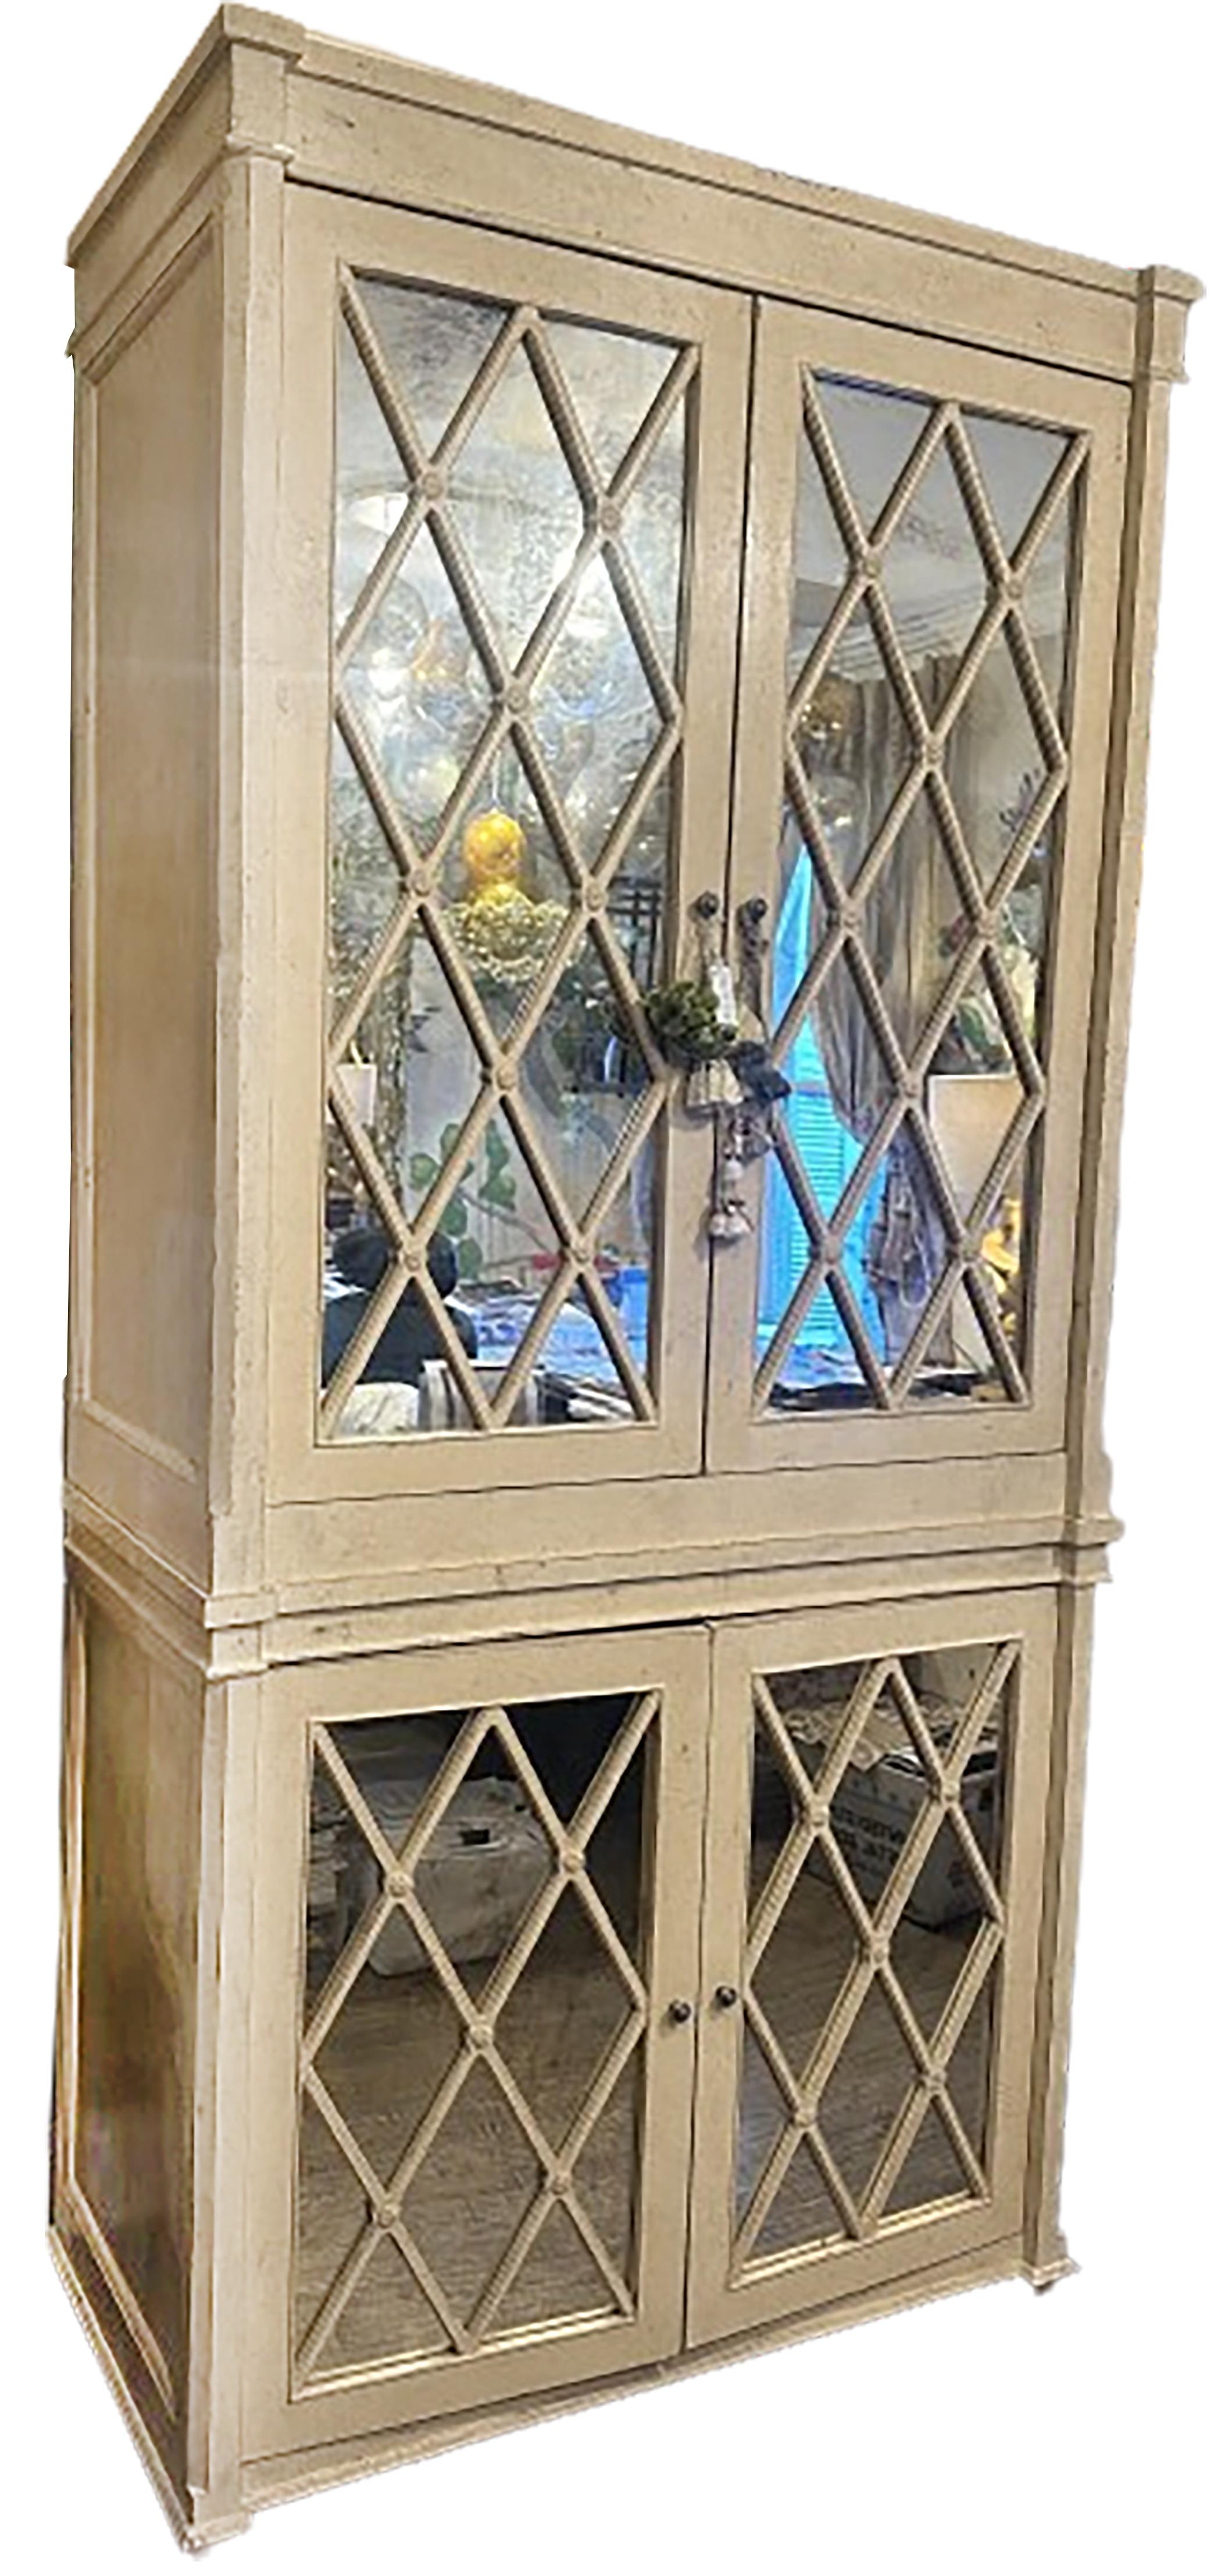 A handsome media armoire with mirrored cabinet doors. A mixture of classical English and modern influences. Metal handles on top and bottom. The TV tray extends out and swivels from the top cabinet. Wood trim cut in diamond shape repeated with glass